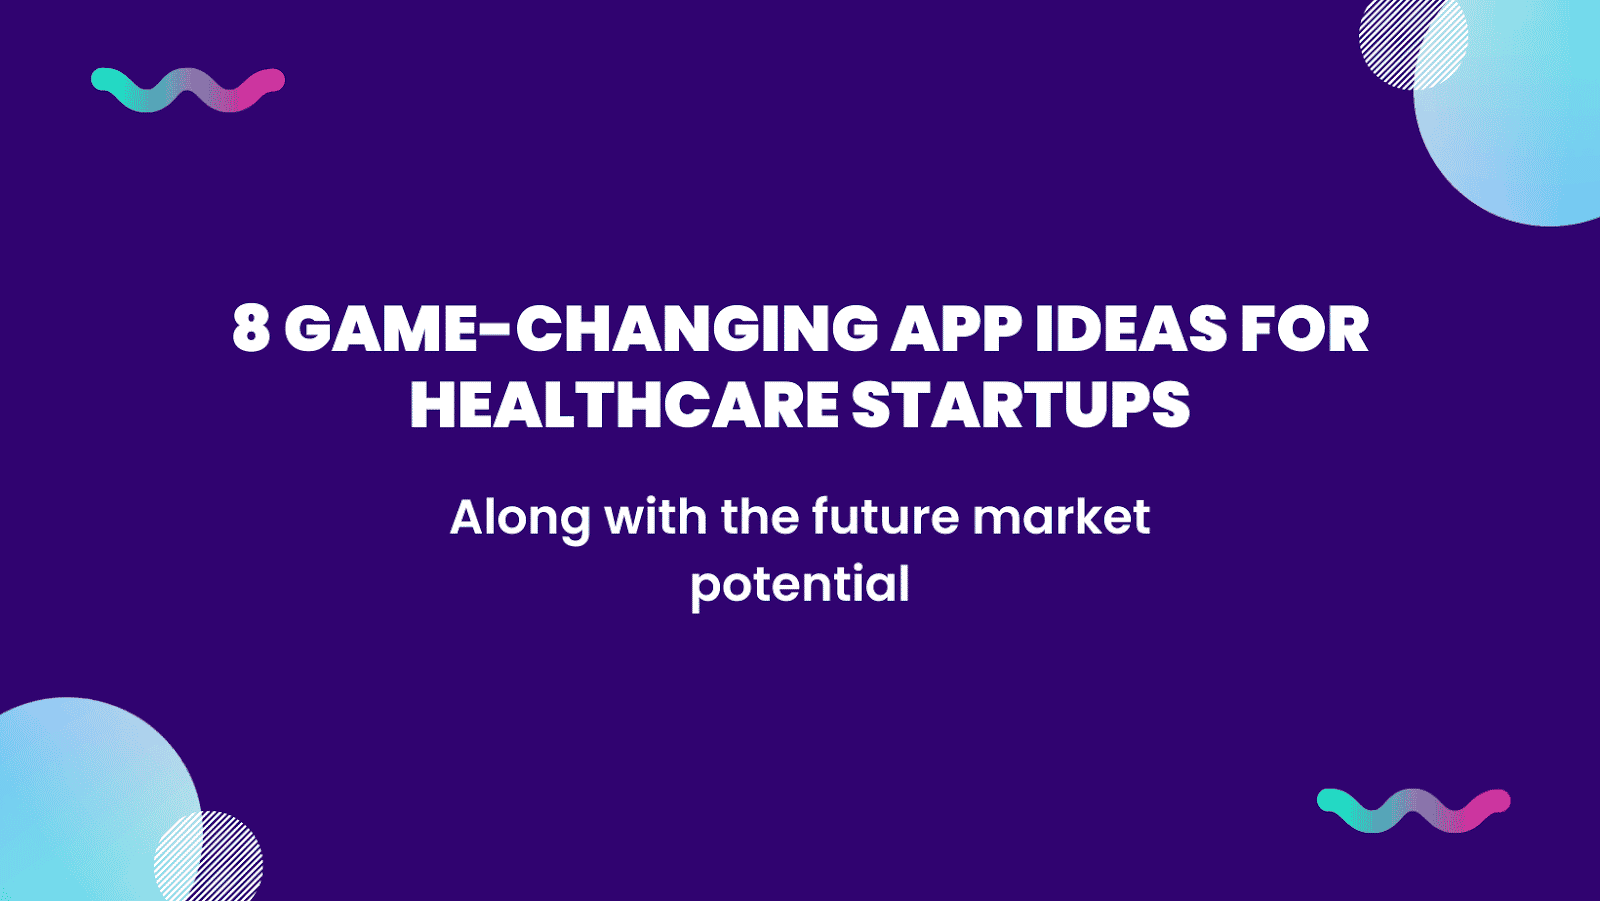 8 Game-Changing App Ideas for Healthcare Startups